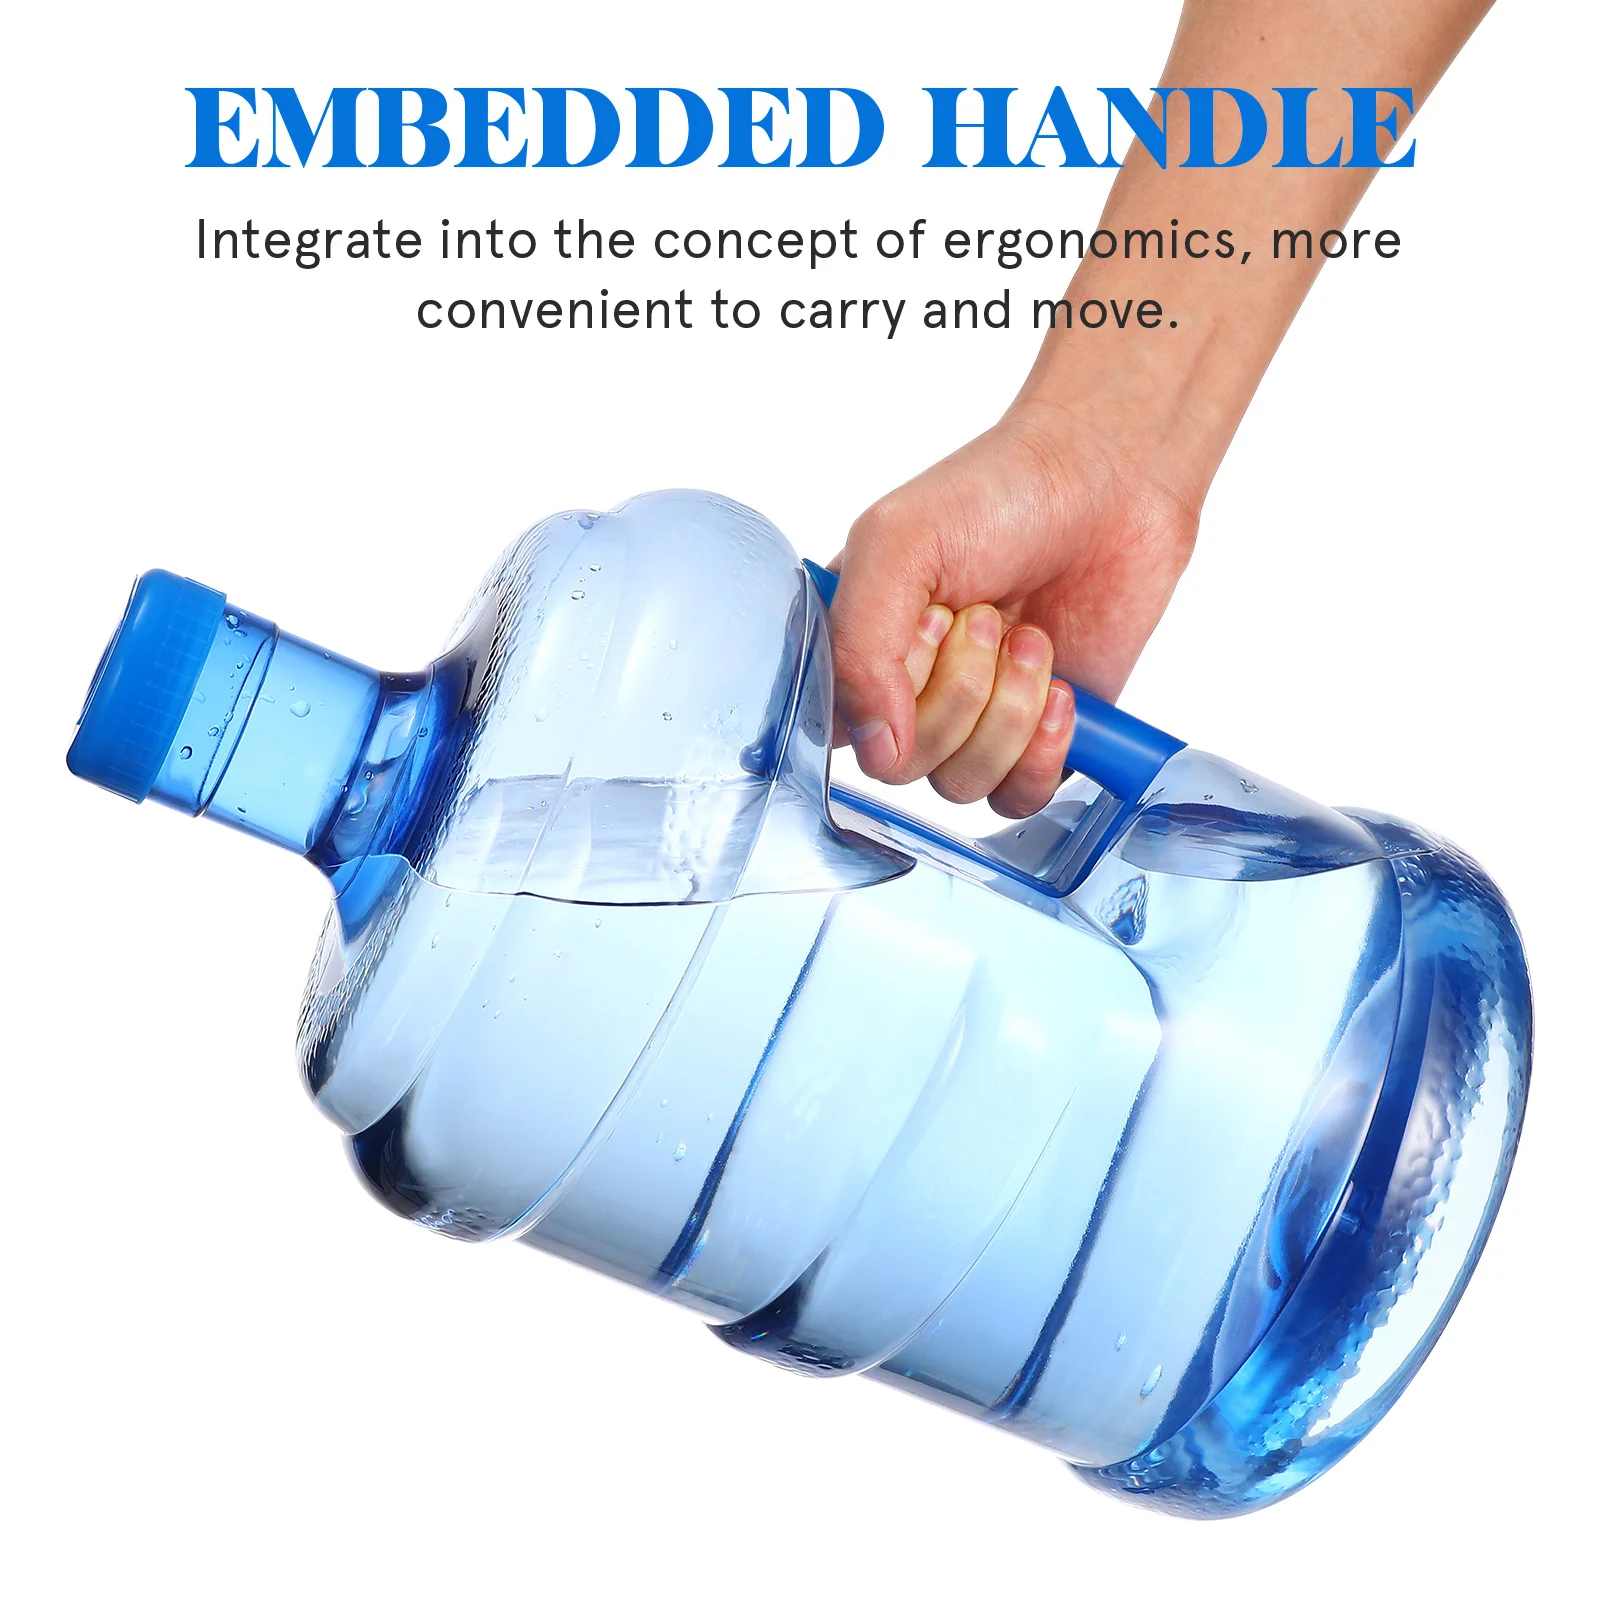 https://ae01.alicdn.com/kf/S5ec1b97816a3402cbfc12274d086c5dbh/Water-Jug-Bottle-Gallon-Container-Bucket-Camping-Portable-Storage-Outdoor-Mineral-Dispenser-Hiking-Carrier-Large-Handle.jpg